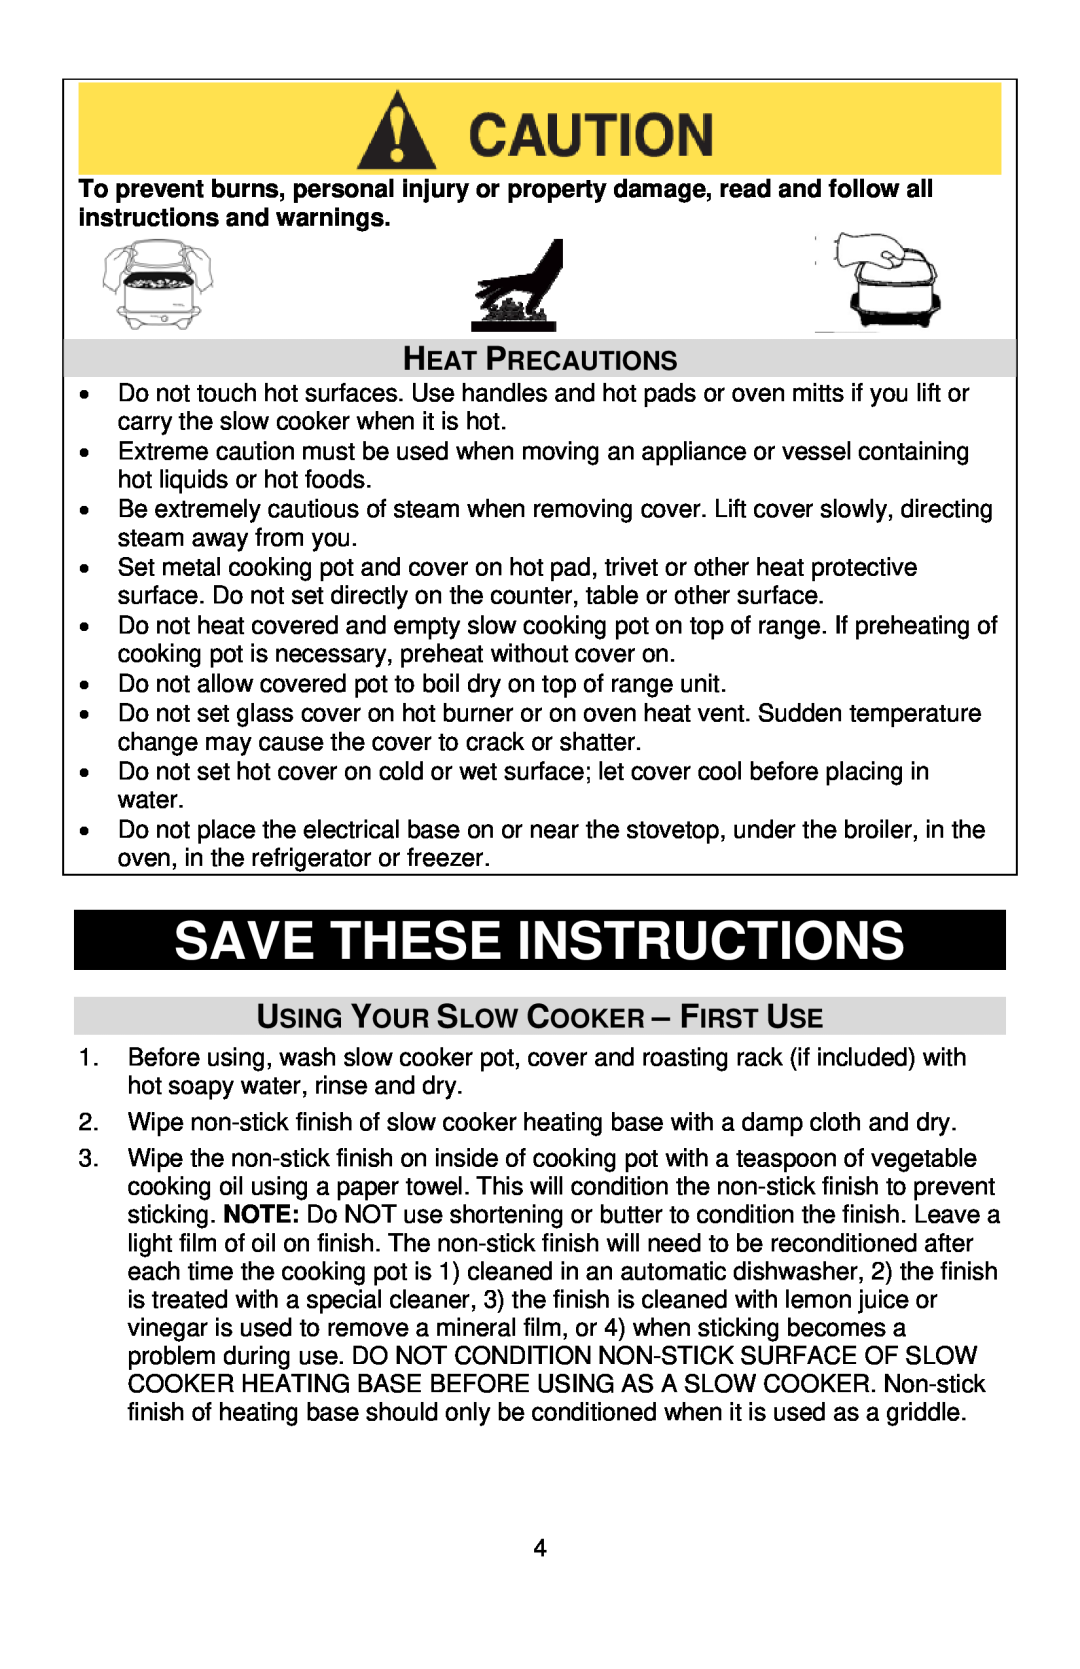 West Bend 5-6 QUART SLOW COOKERS Save These Instructions, Heat Precautions, Using Your Slow Cooker - First Use 